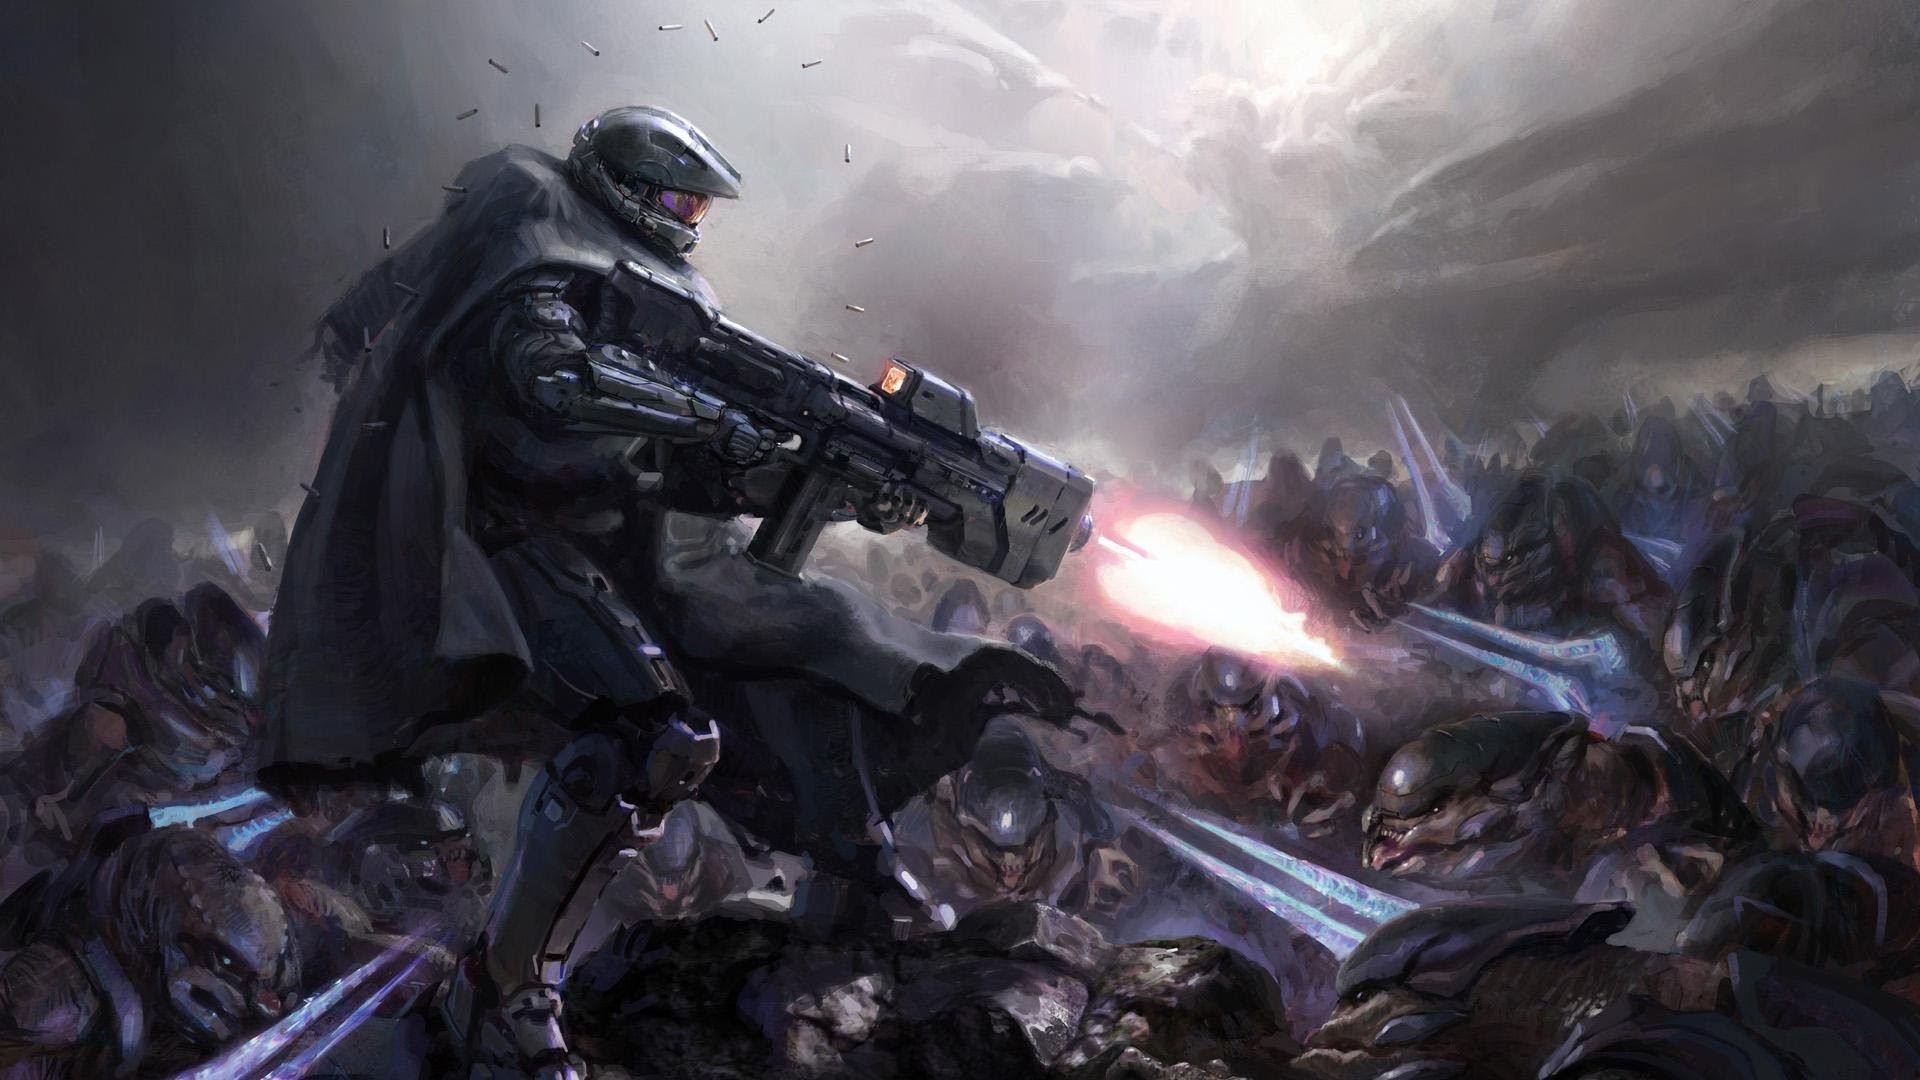 halo 5 guardians wallpaper,action adventure game,pc game,shooter game,cg artwork,games